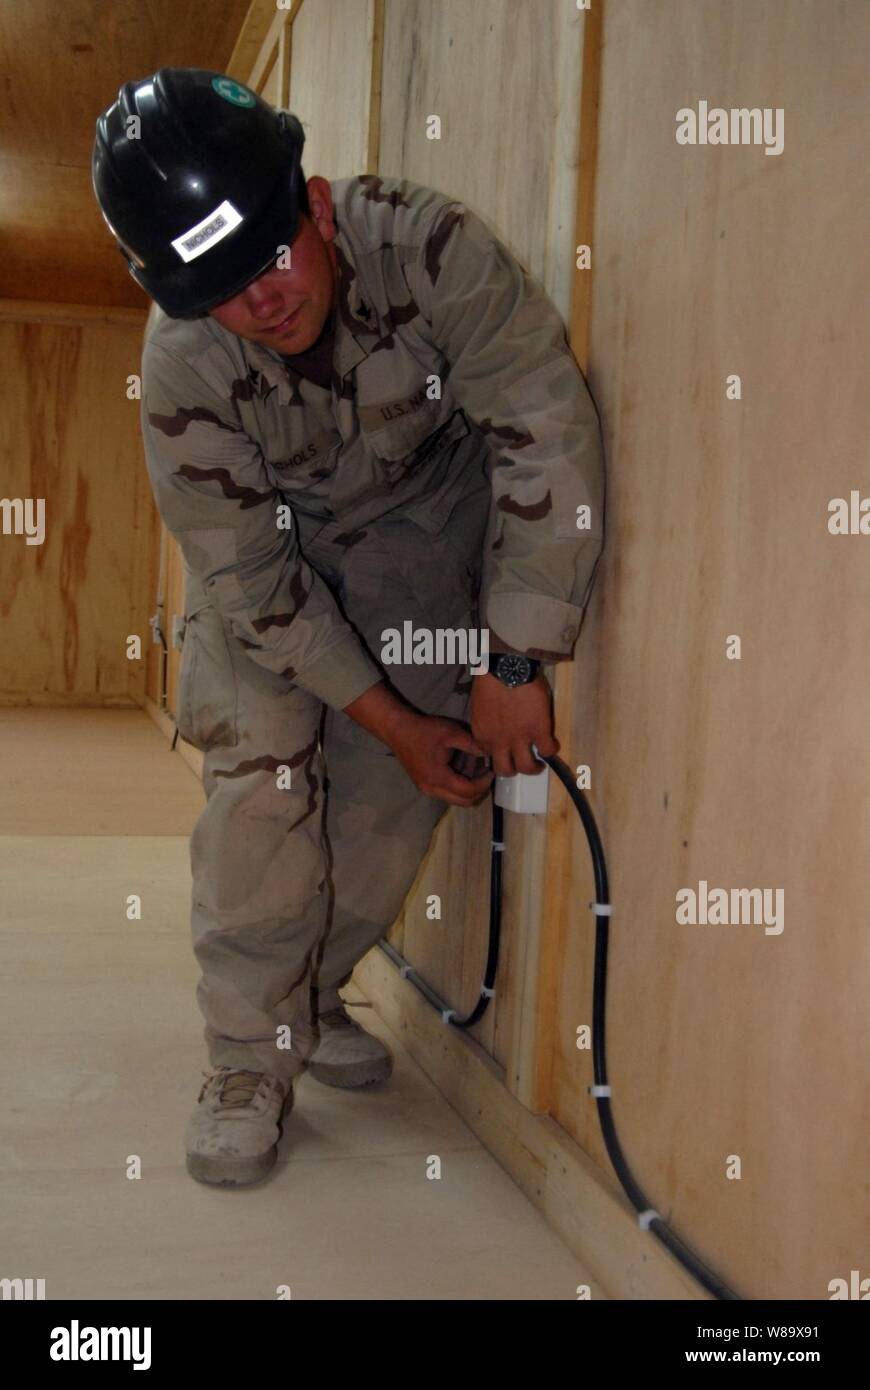 U.S. Navy Petty Officer 3rd Class Joe Nichols from Amphibious Construction Battalion 2 tests the electrical outlets during a completion-of-work tour through the new barracks and dining facility at Patrol Base Mahawil, Iraq, on March 2, 2009. Stock Photo